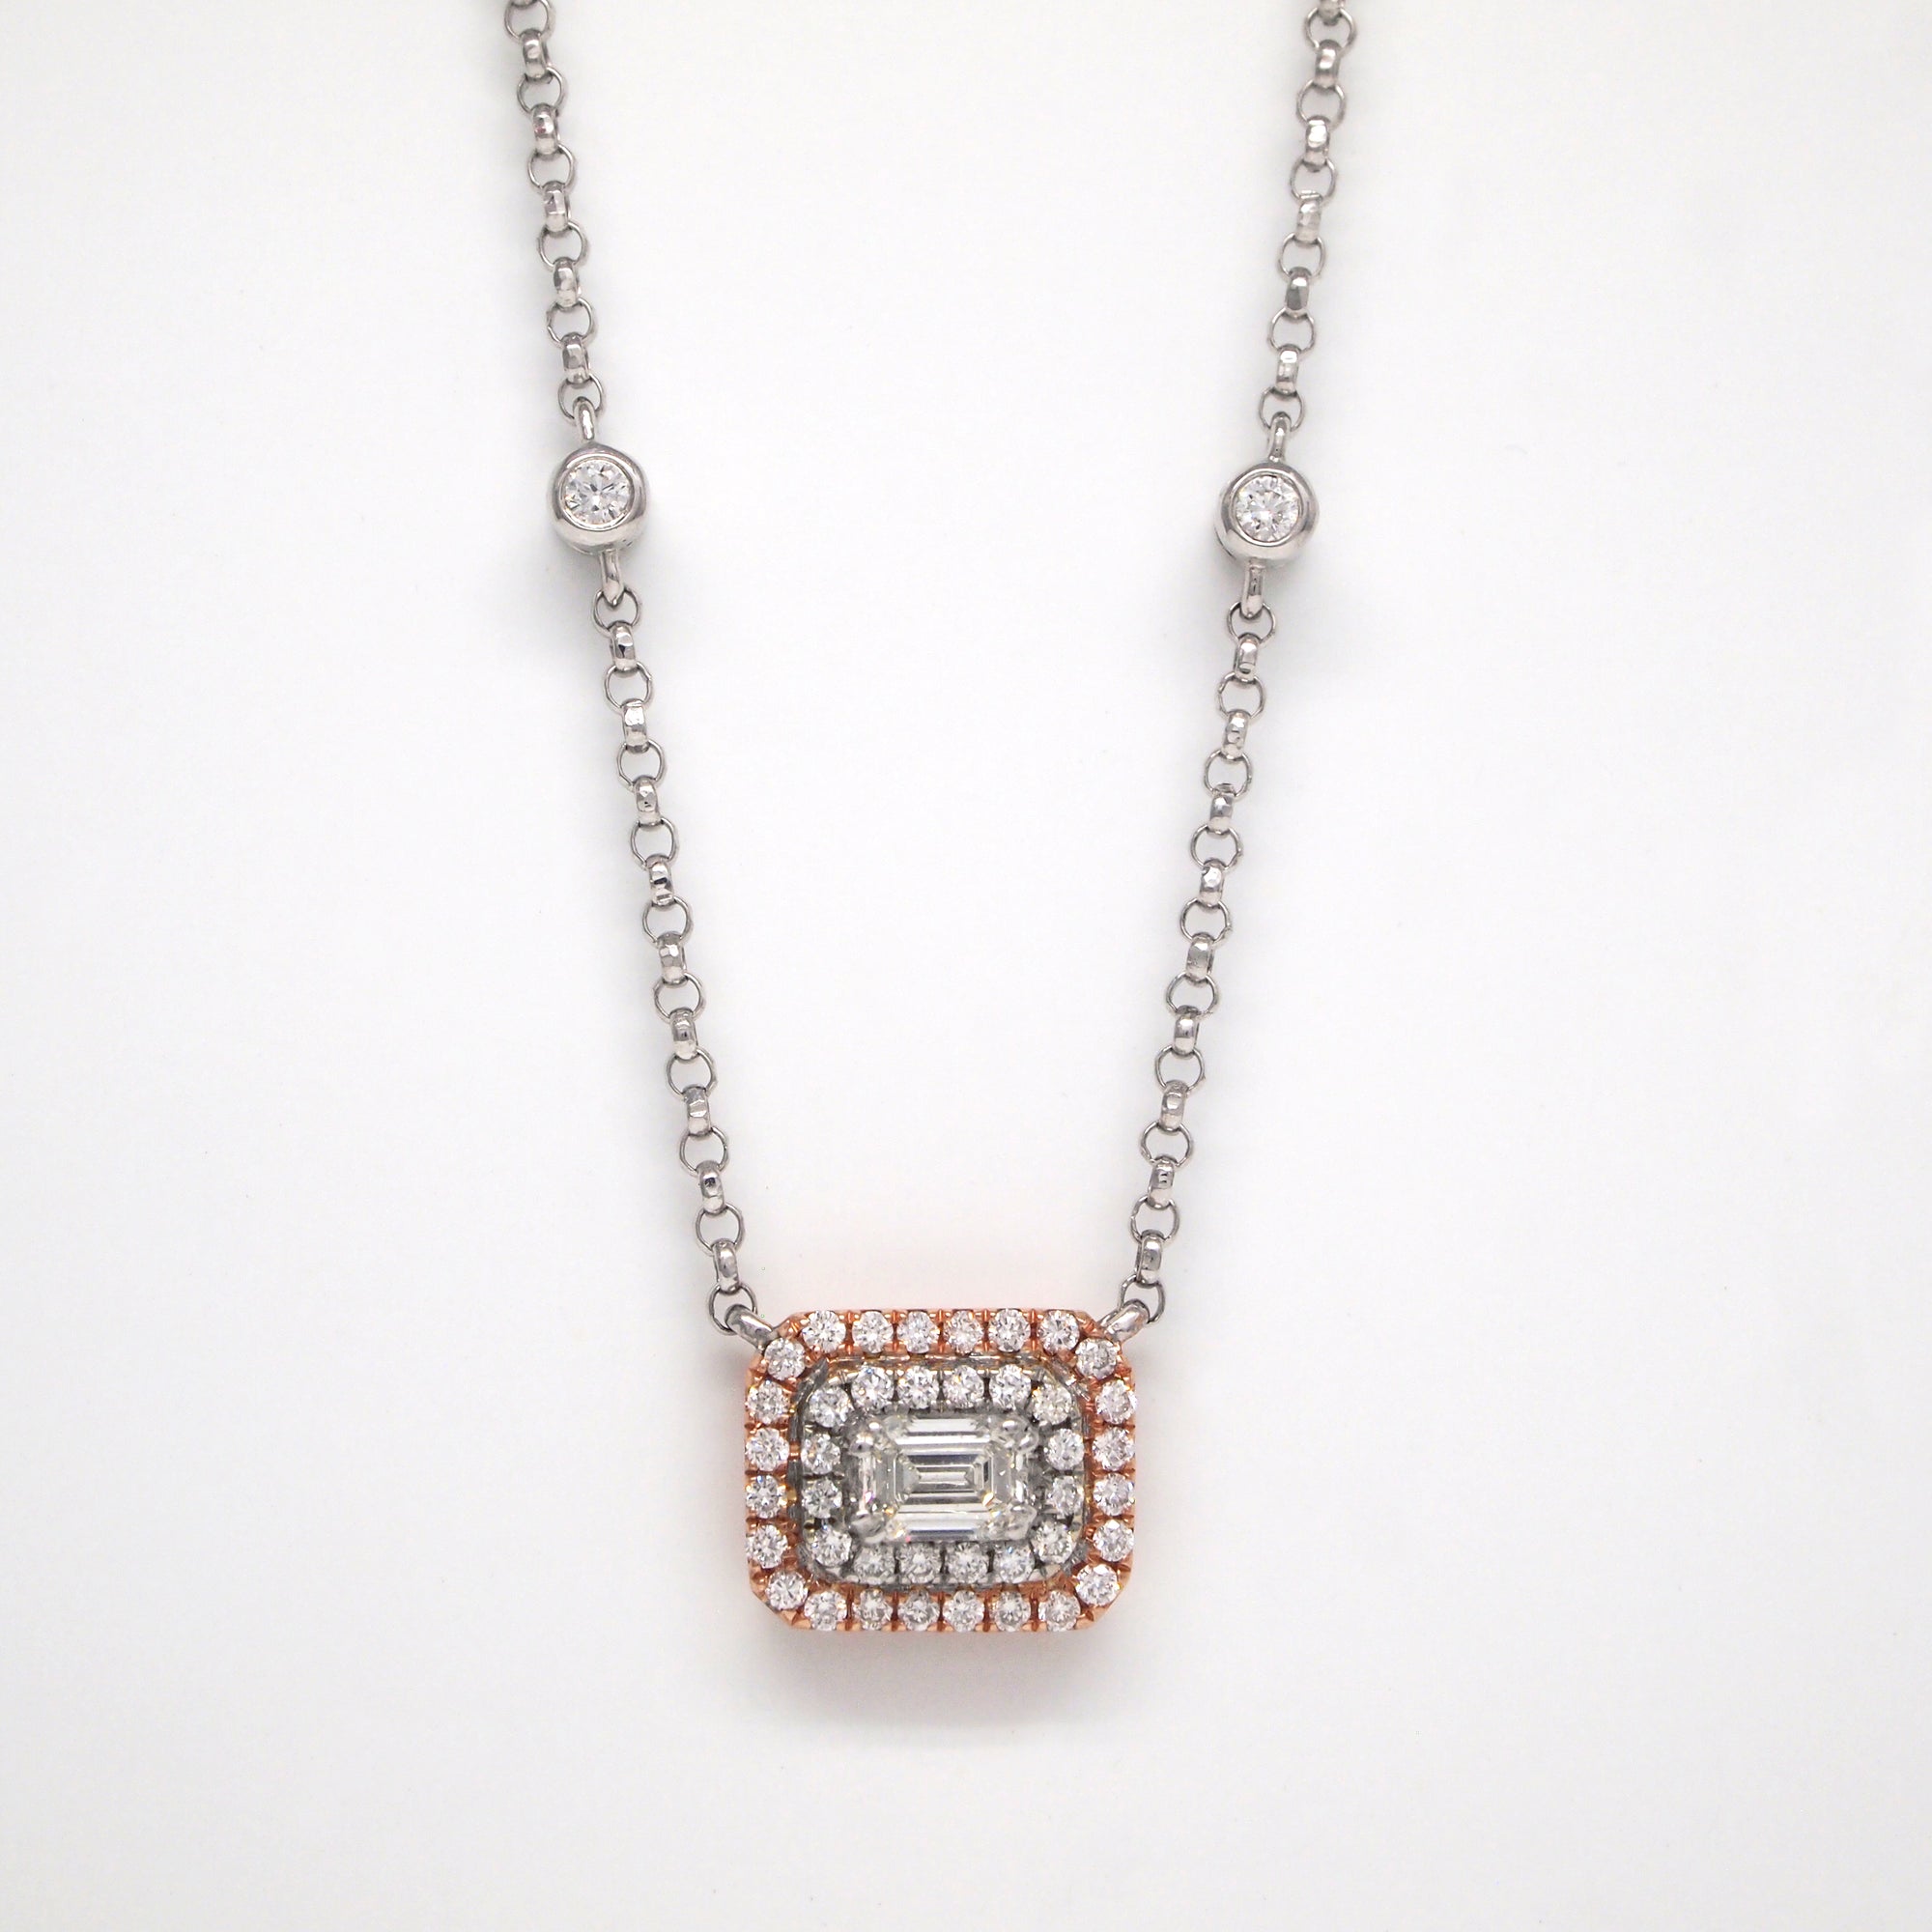 14K rose gold and white gold necklace with 1 emerald-cut diamond weighing 0.31 carats, and 42 brilliant cut diamonds weighing a total of 0.30 carats.